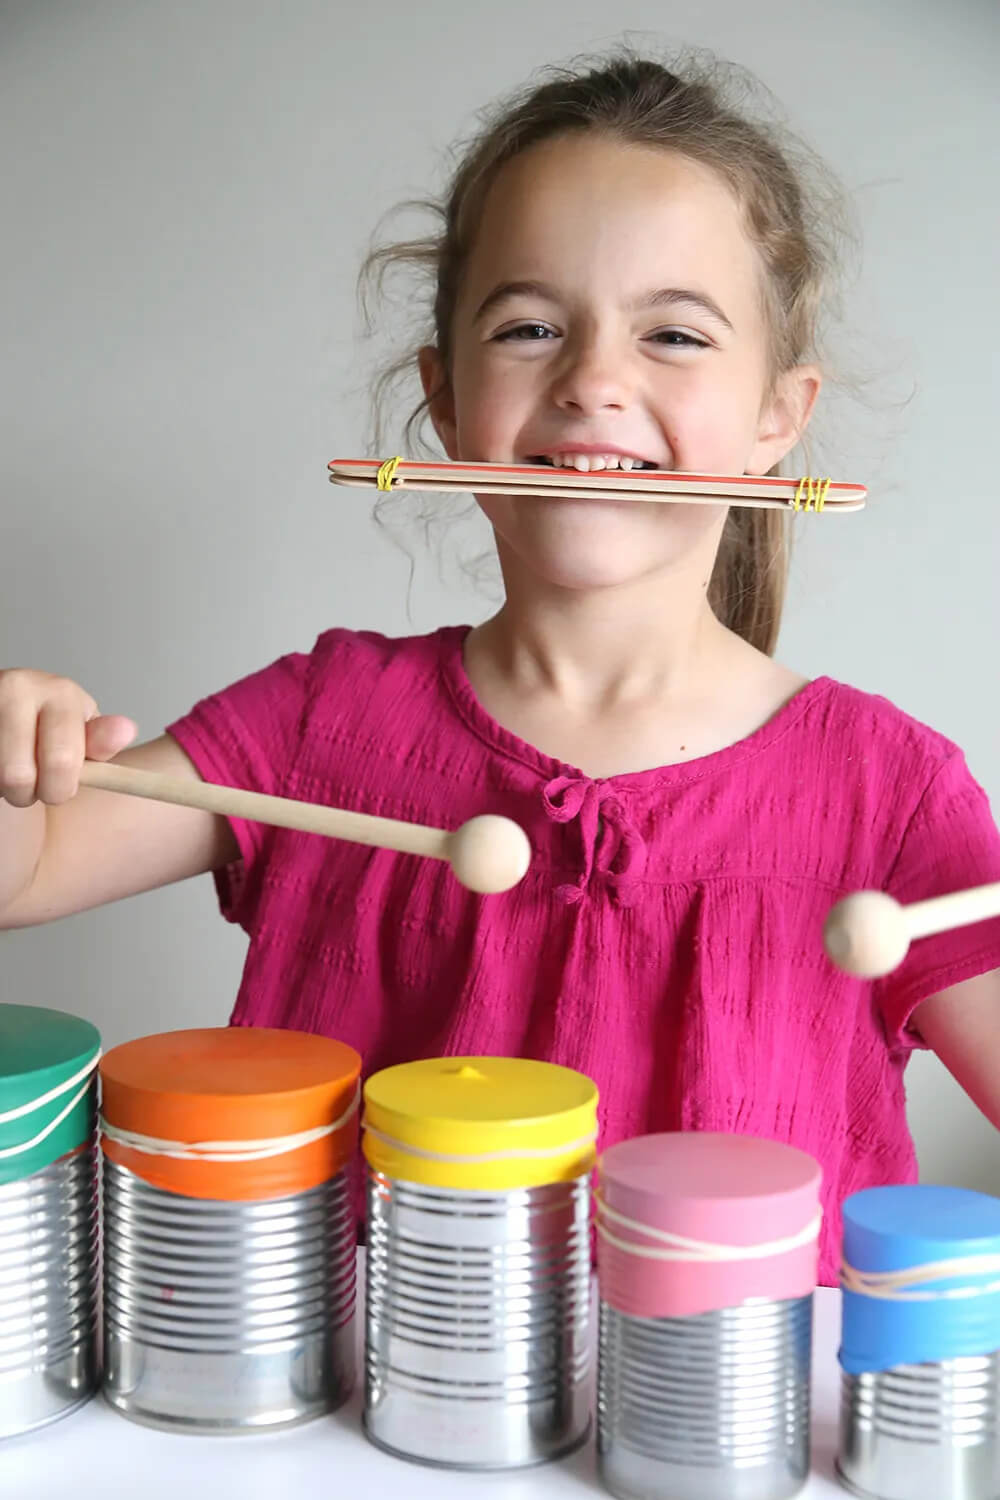 Drum Set & Kazoo - Fun Craft Activity With Recycled Tin Can, Drumstick & Popsicle Stick - Crafting a Kazoo with Your Own Hands for Kids